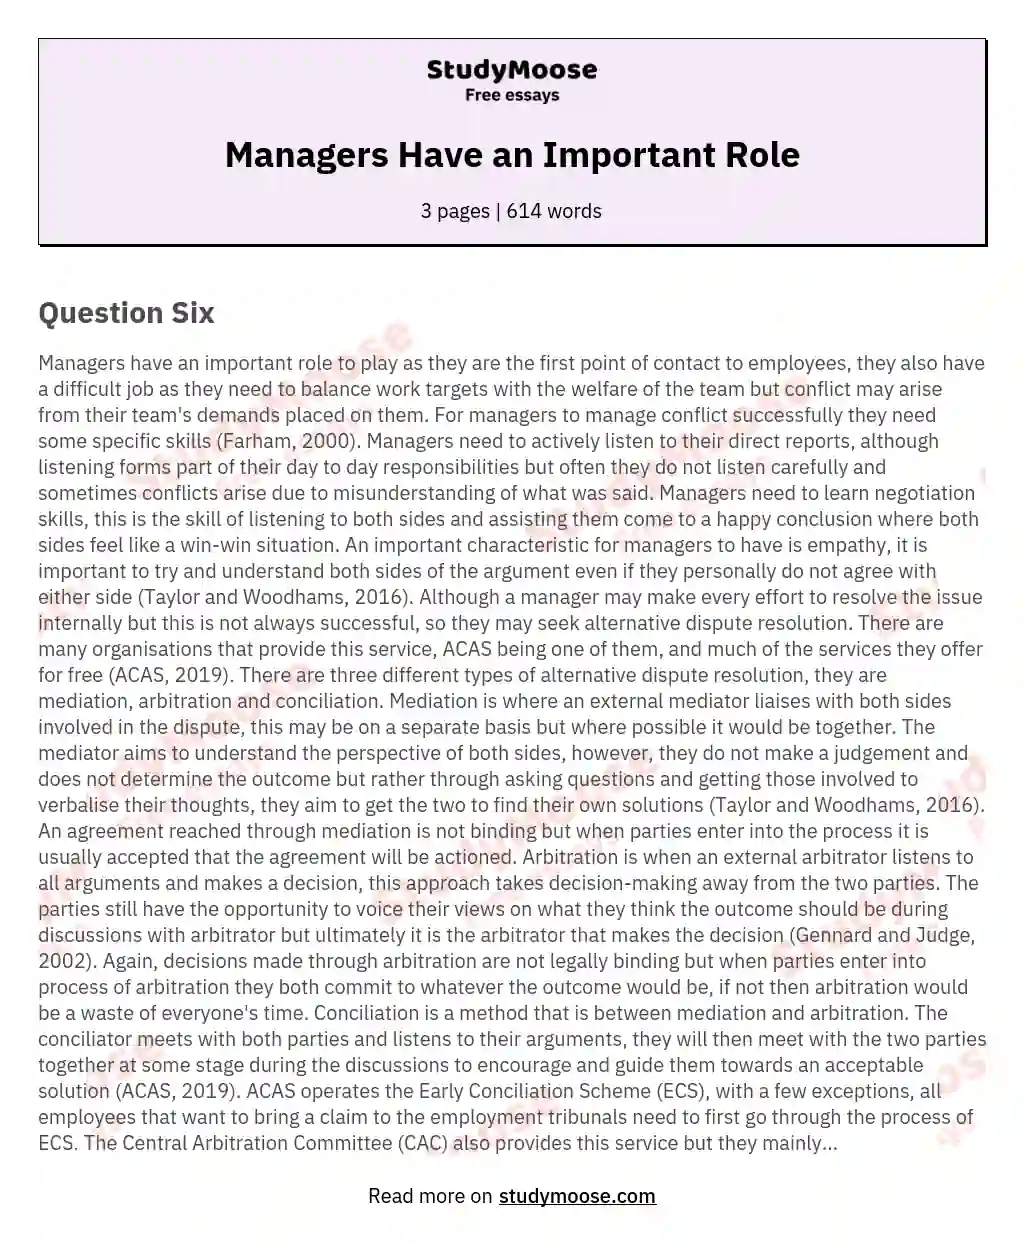 Managers Have an Important Role essay